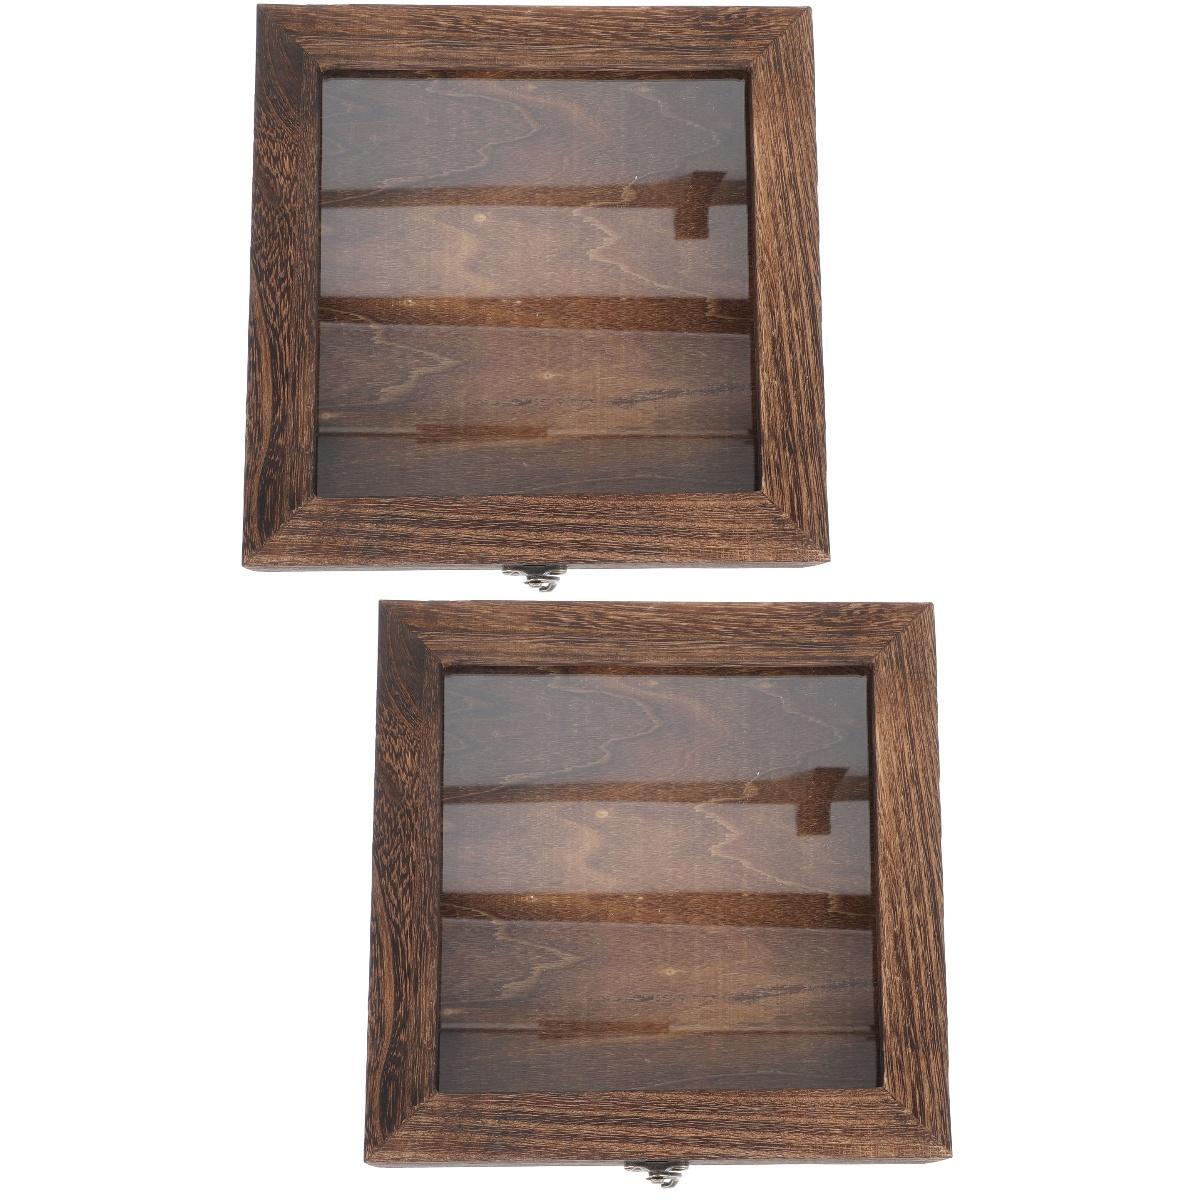 2 Pcs Insect Specimen Box Photos Memory Jewelry Display Case Glass Multi- Wooden Square Shadow Chinese Style Rustic Picture